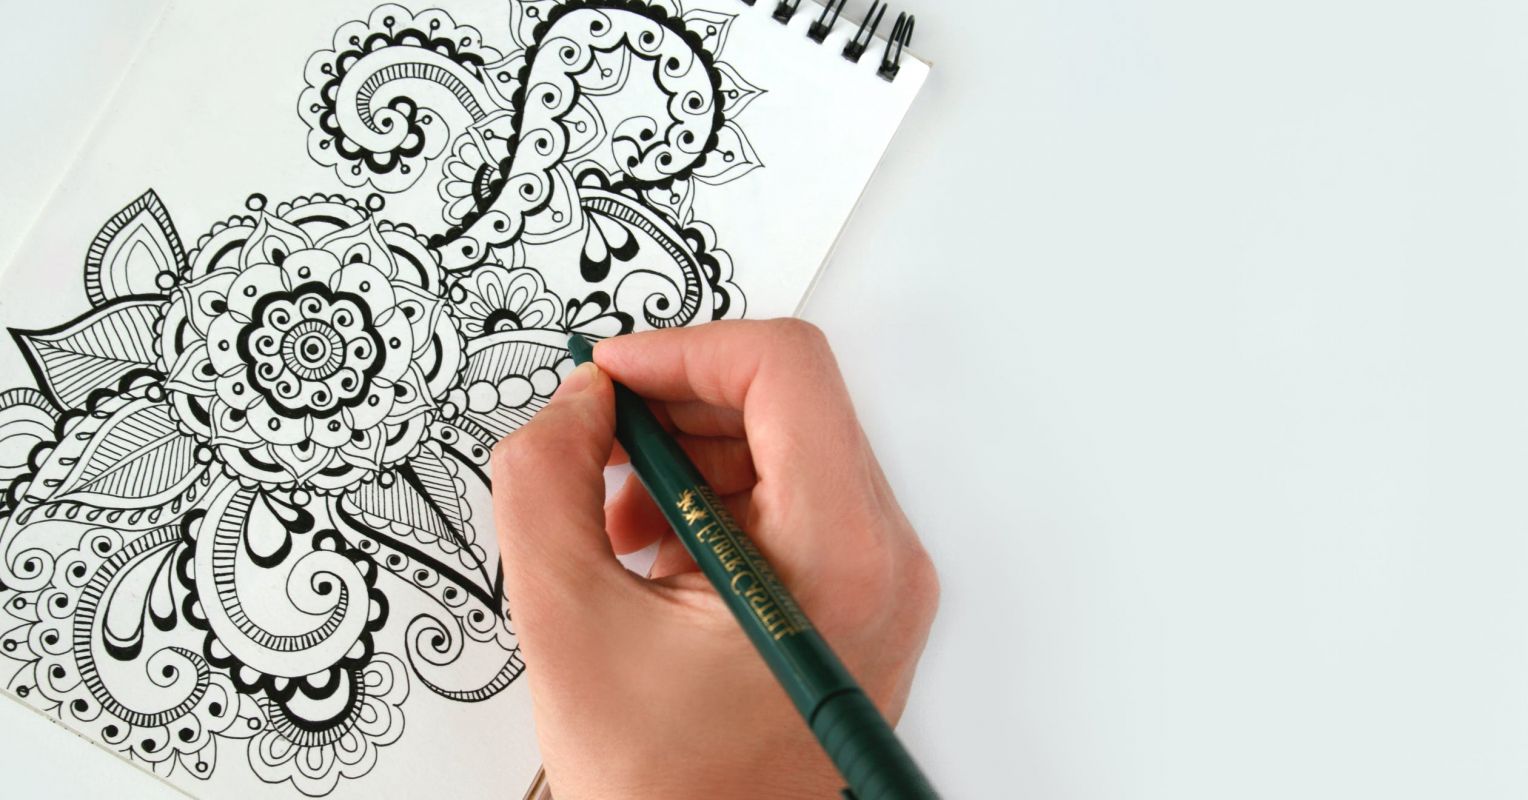 Can Coloring Mandalas Reduce Anxiety A Replication Study